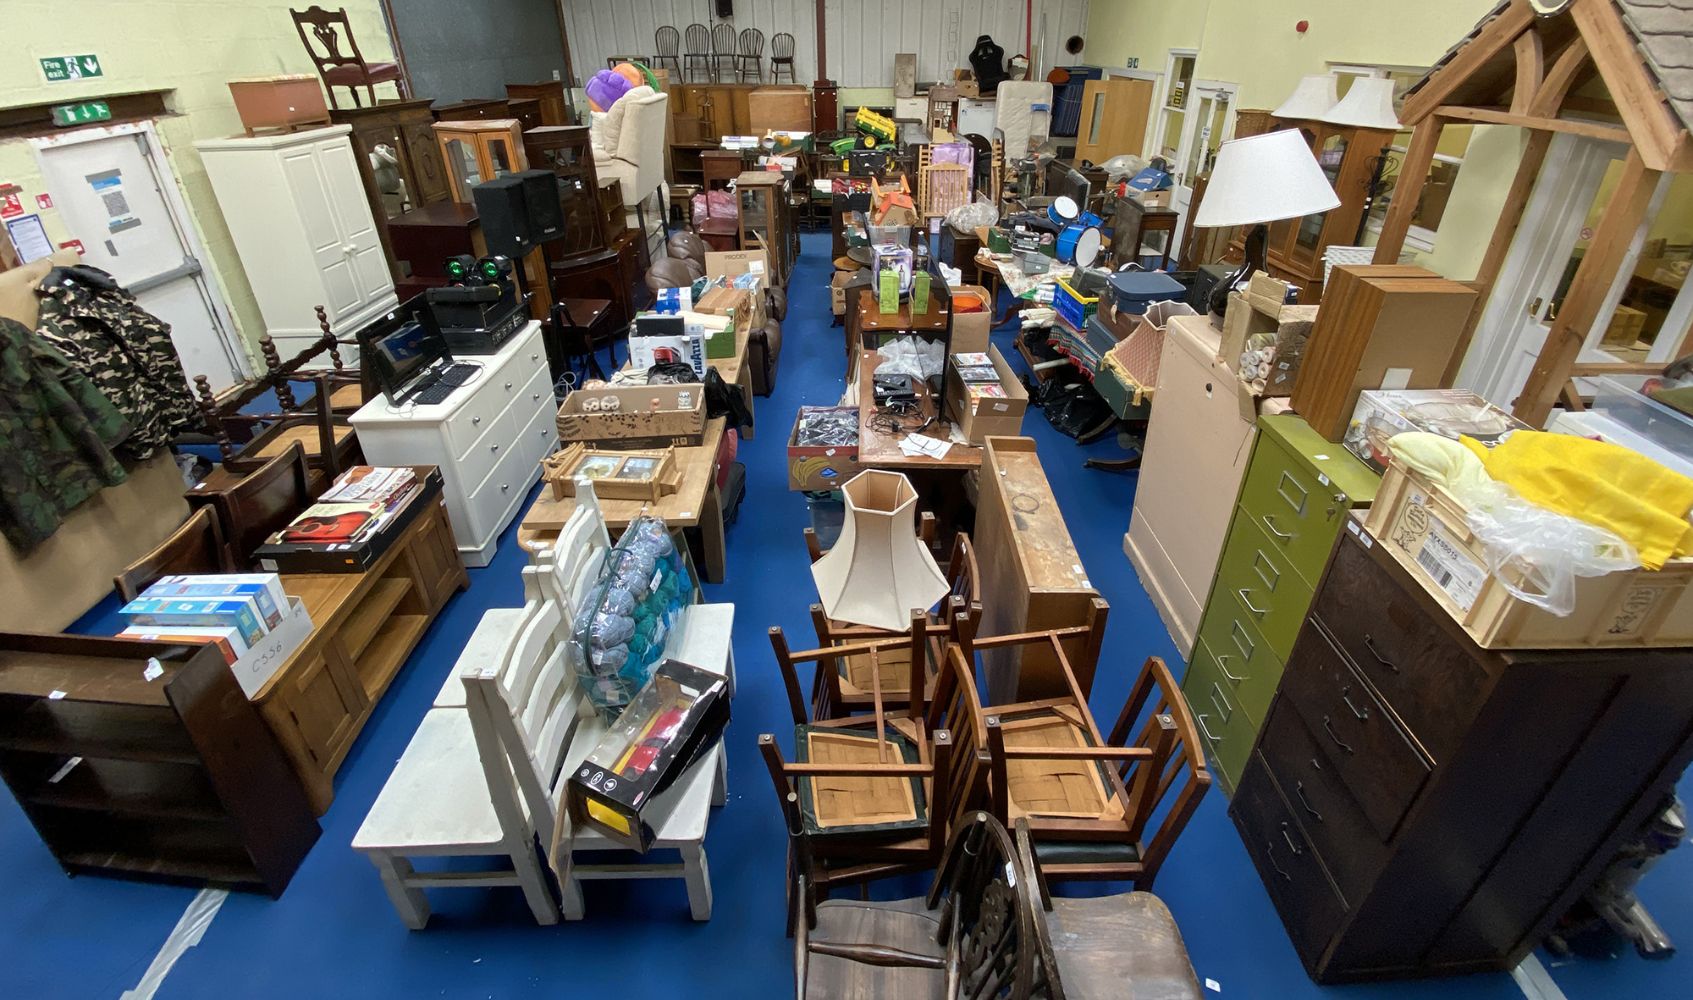 Online Only Late January Auction of Vintage & Modern Effects, Tools and Bric-a-Brac